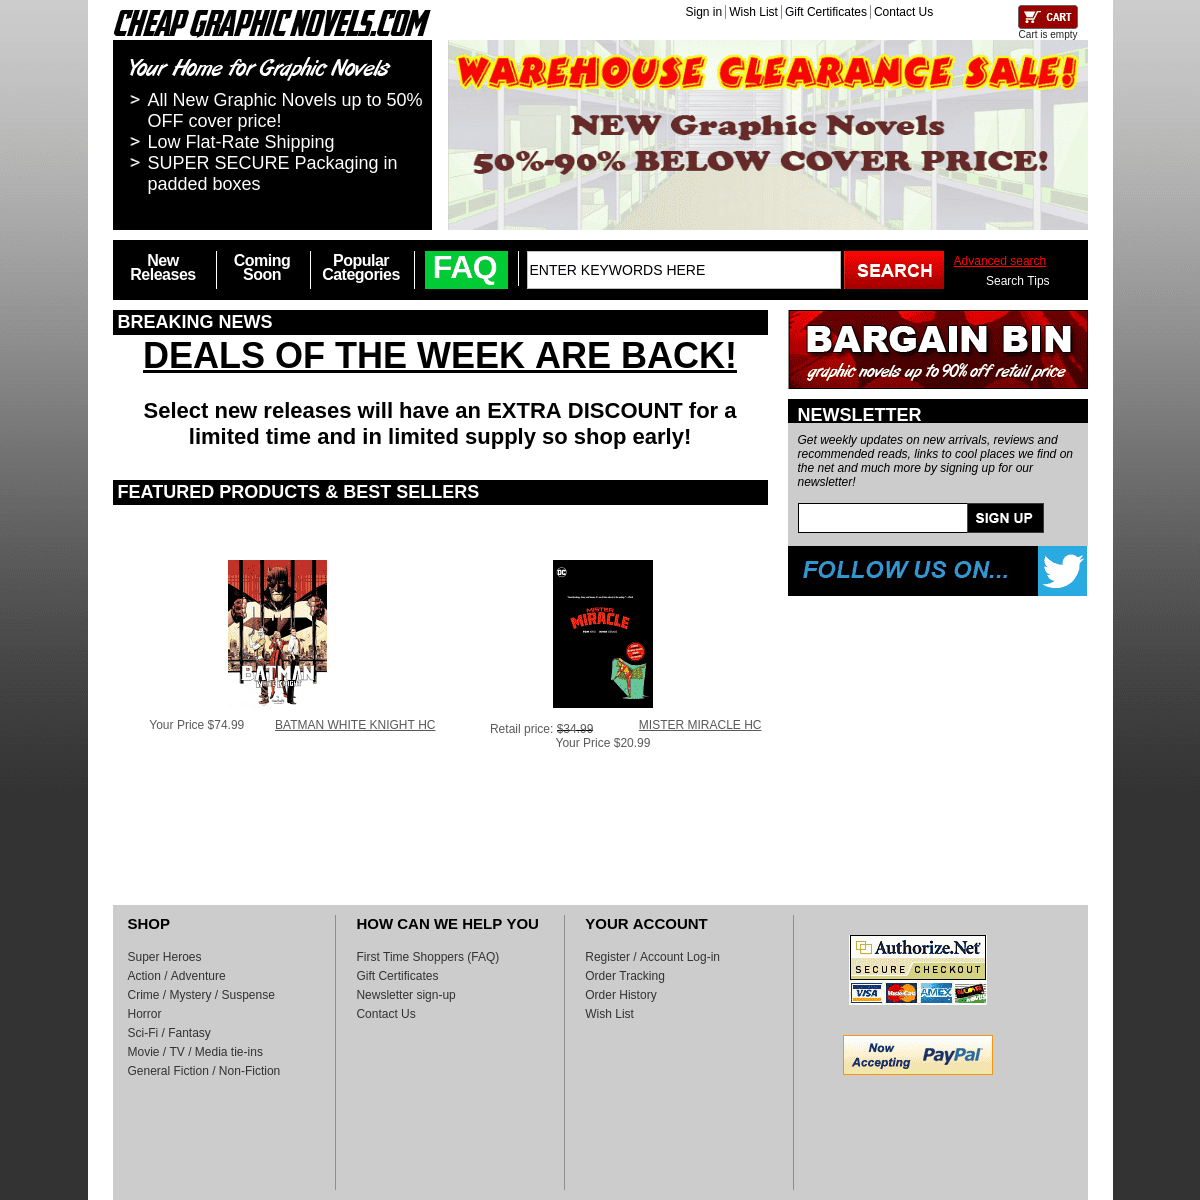 CheapGraphicNovels.com